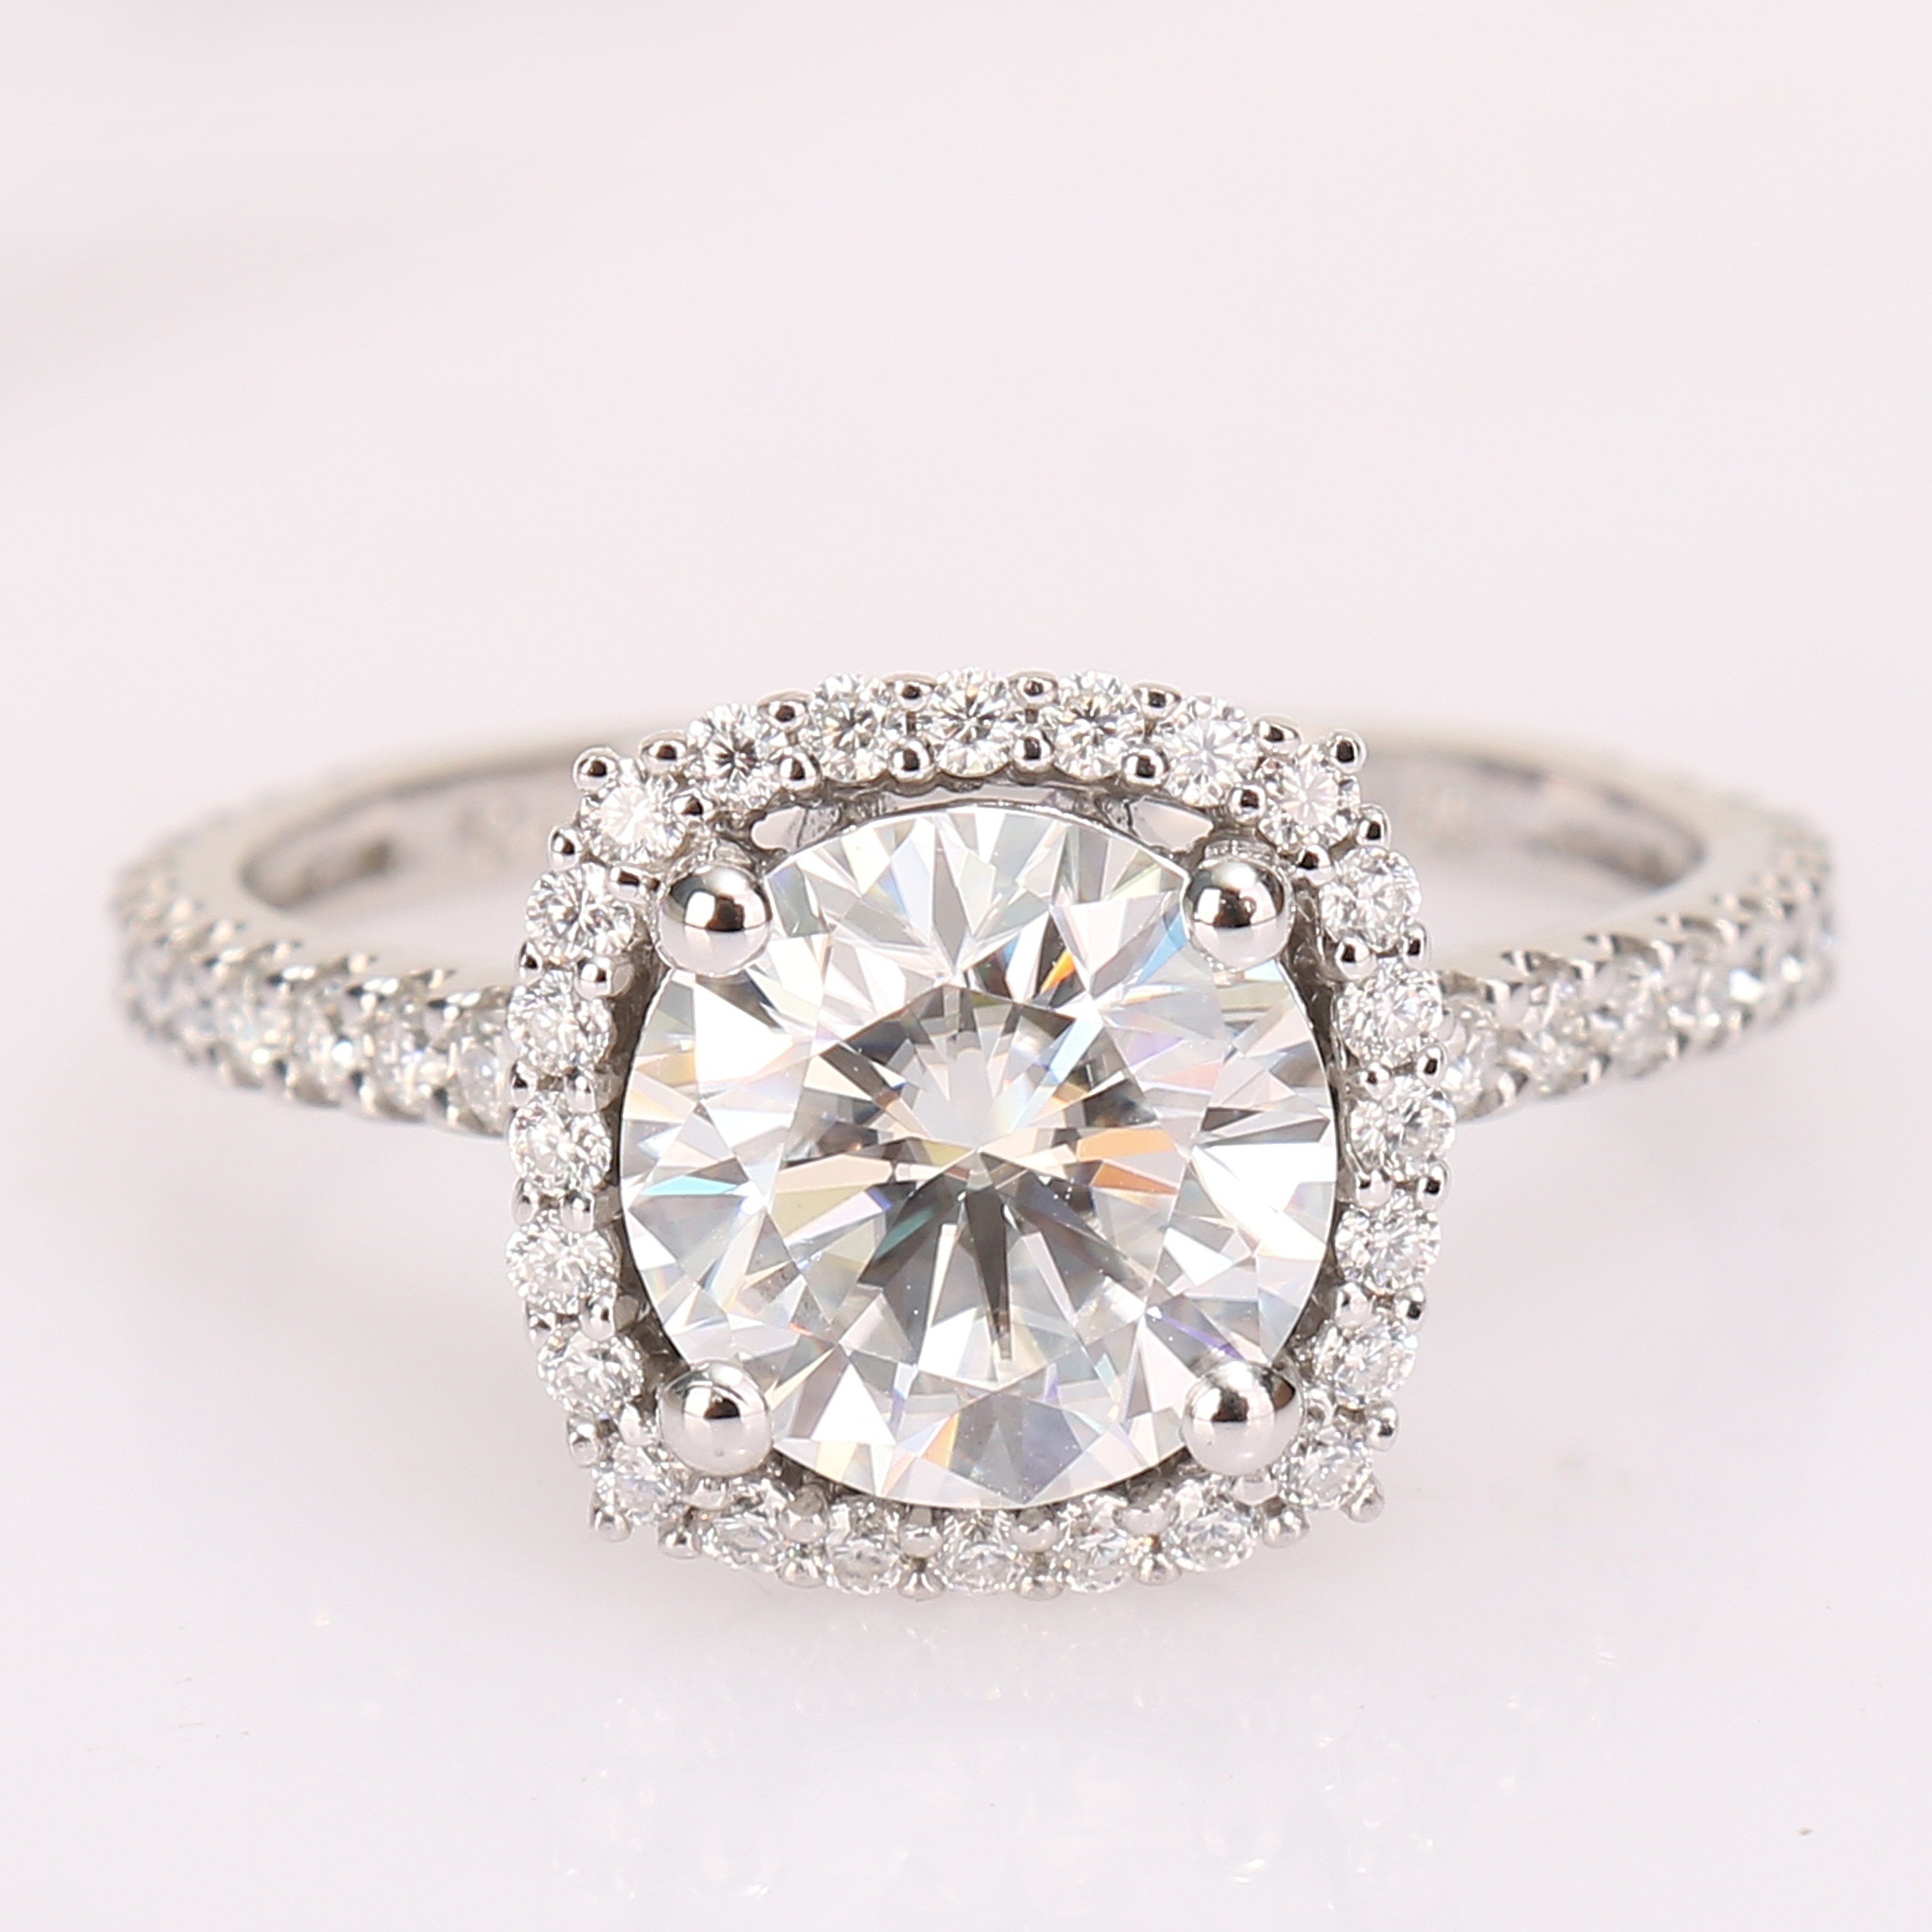 Details about   3 Ct Round Cut Moissanite Flower Halo Engagement Ring Solid 14K White Gold Over.